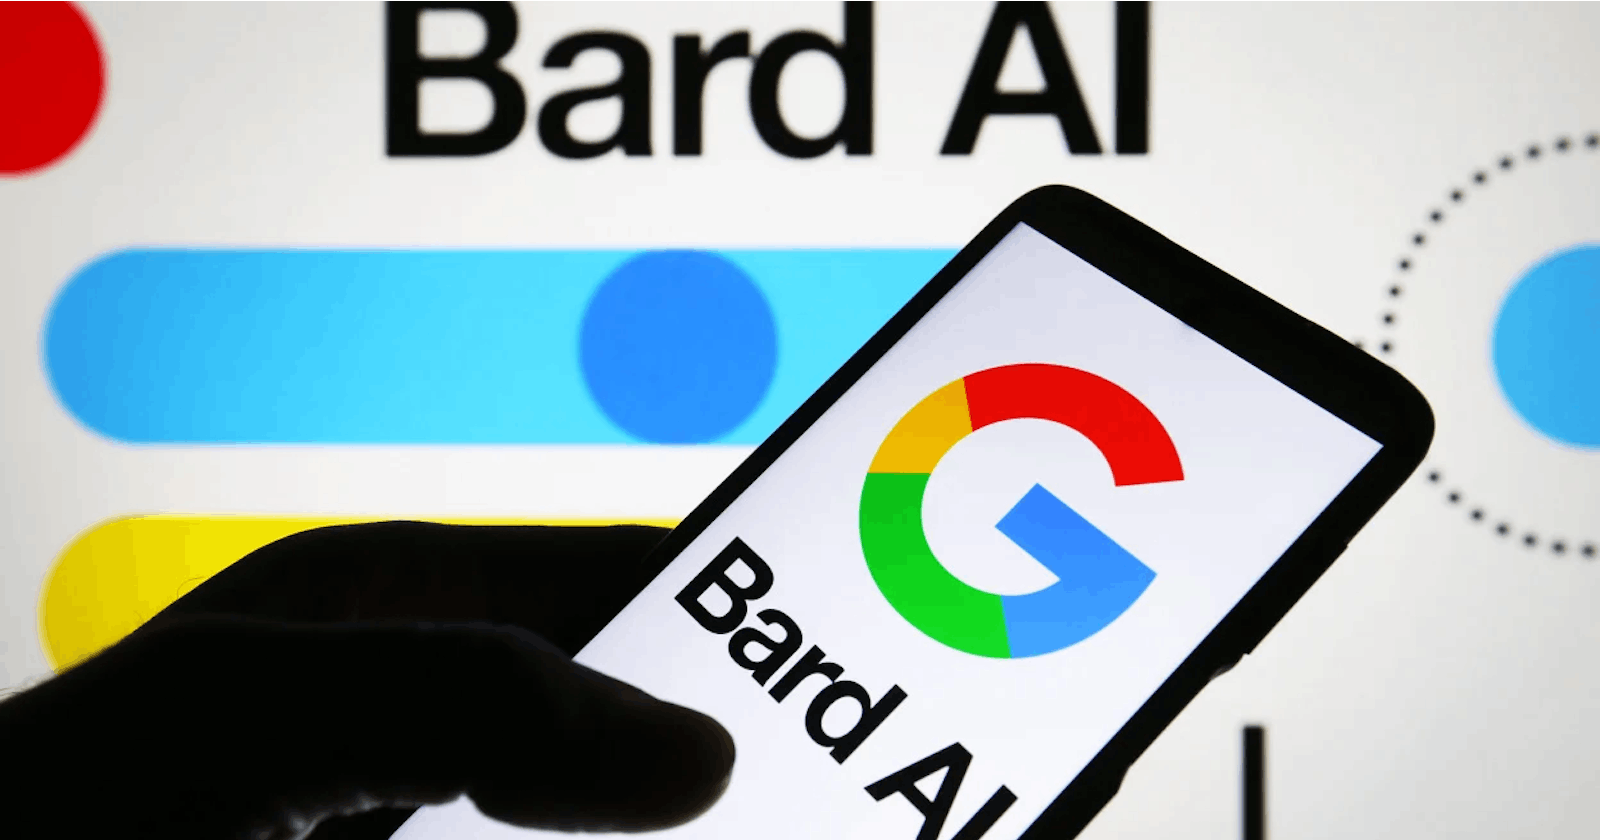 Google's AI Life Advice Project: The Potential Benefits and Risks